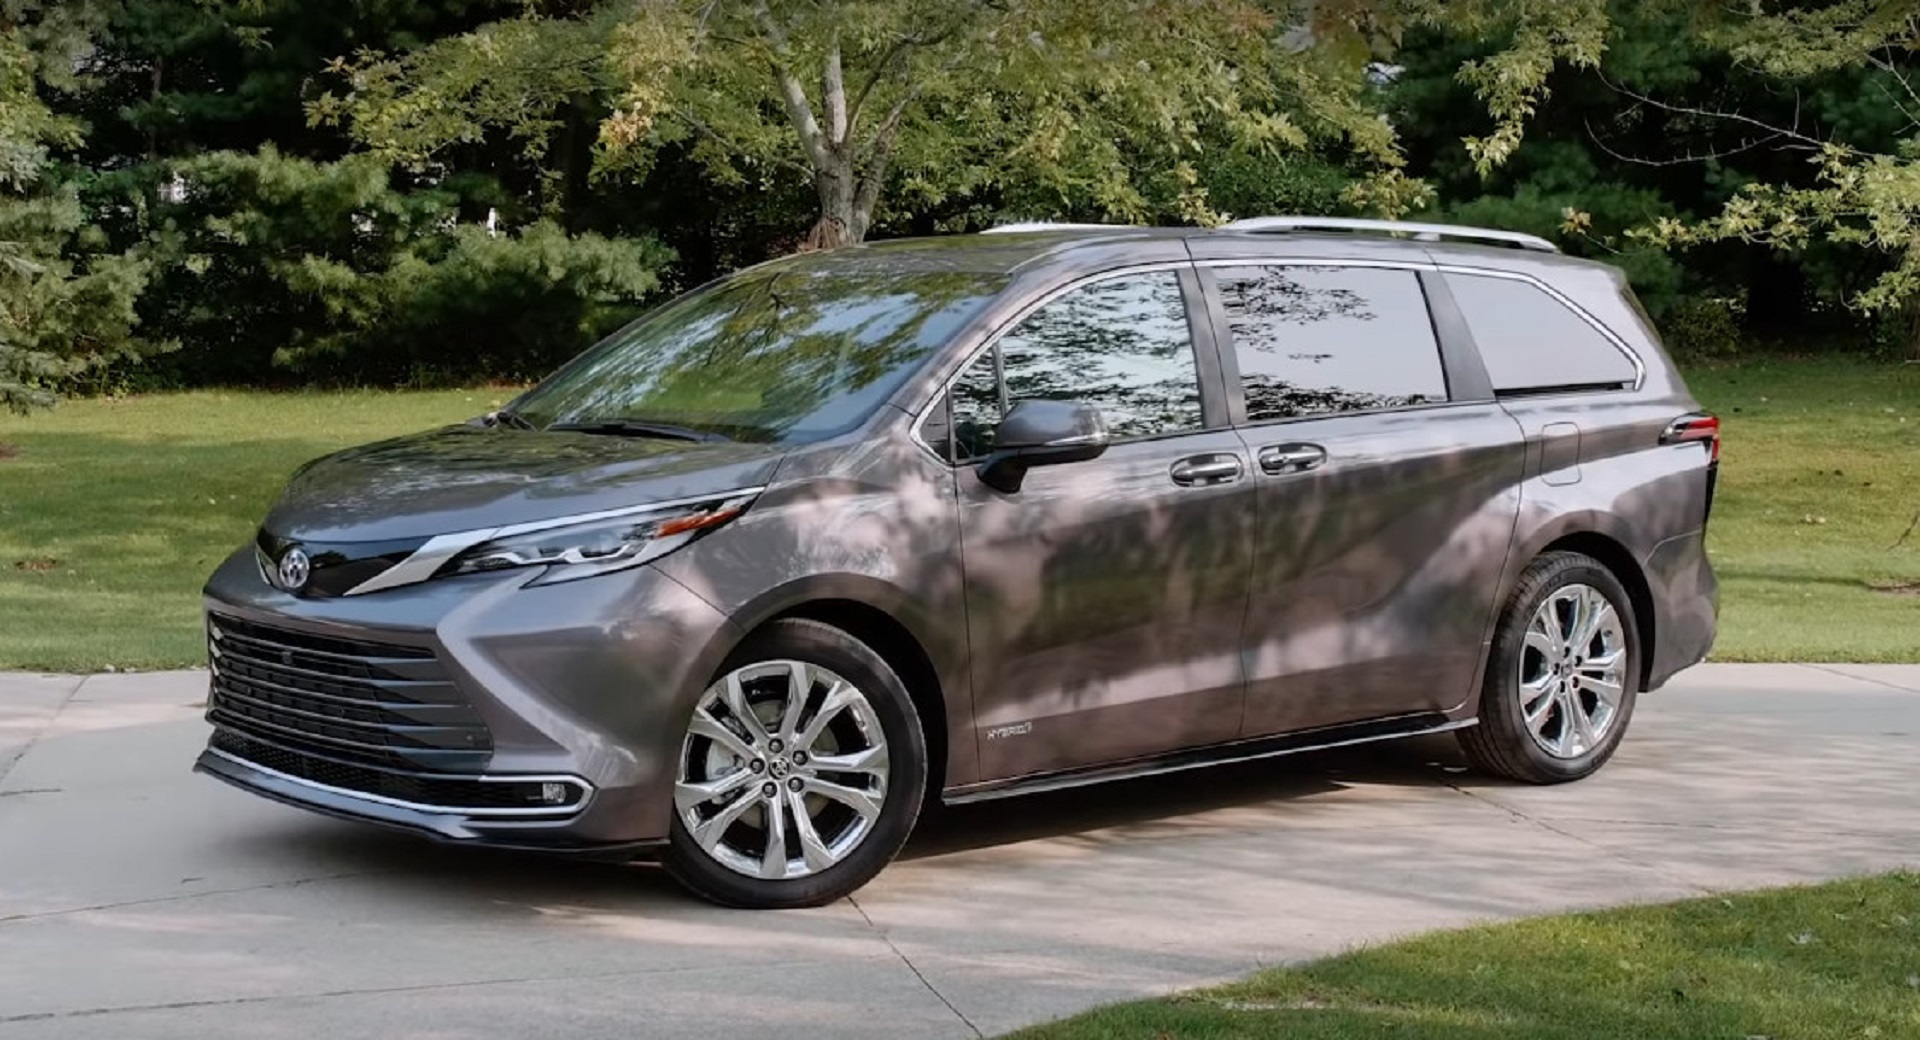 Why Buy An SUV When You Can Have A Toyota Sienna? | Carscoops